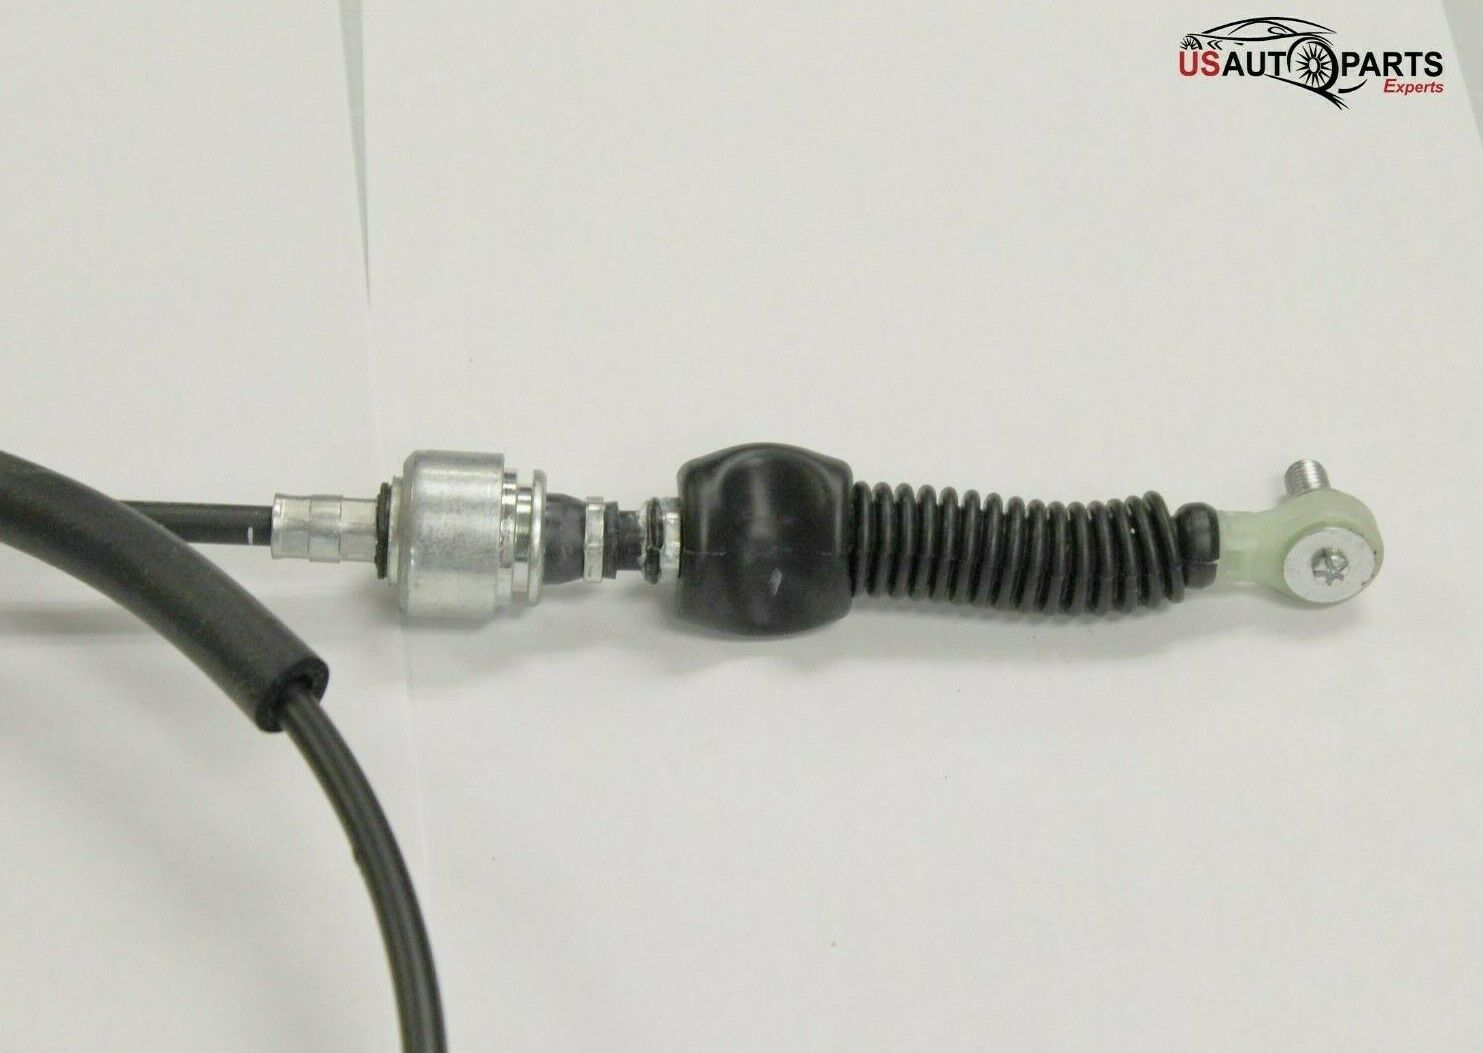 Transmission Shift Control Cable -For -2001-2005 Toyota RAV4 Trans New